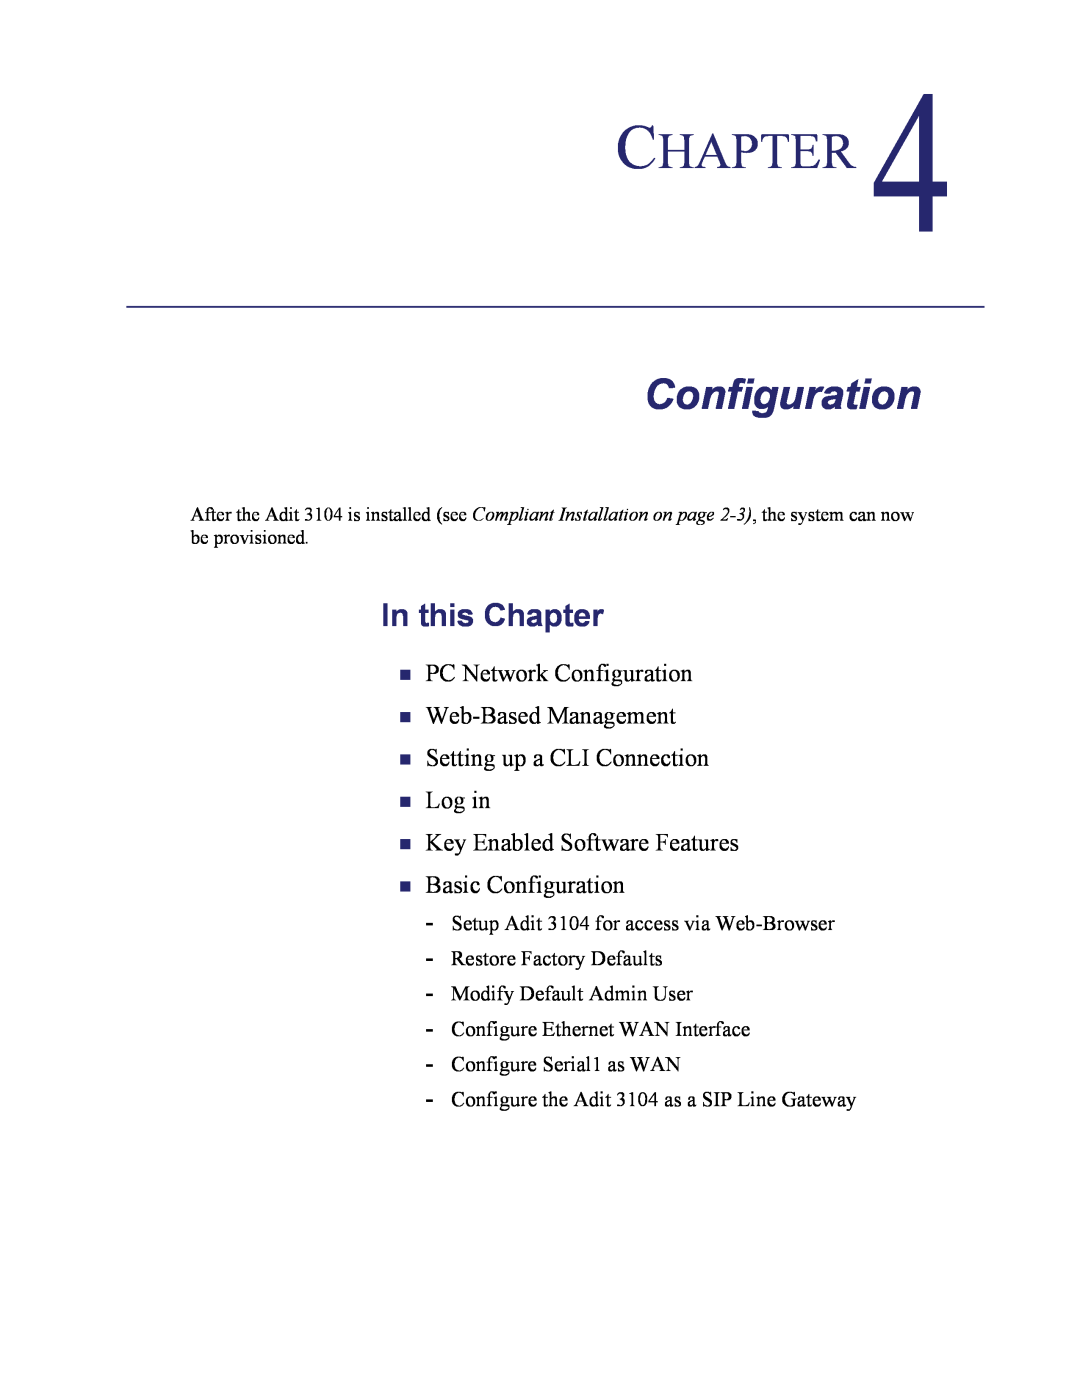 Carrier Access Adit 3104 PC Network Configuration Web-Based Management, Basic Configuration, In this Chapter 